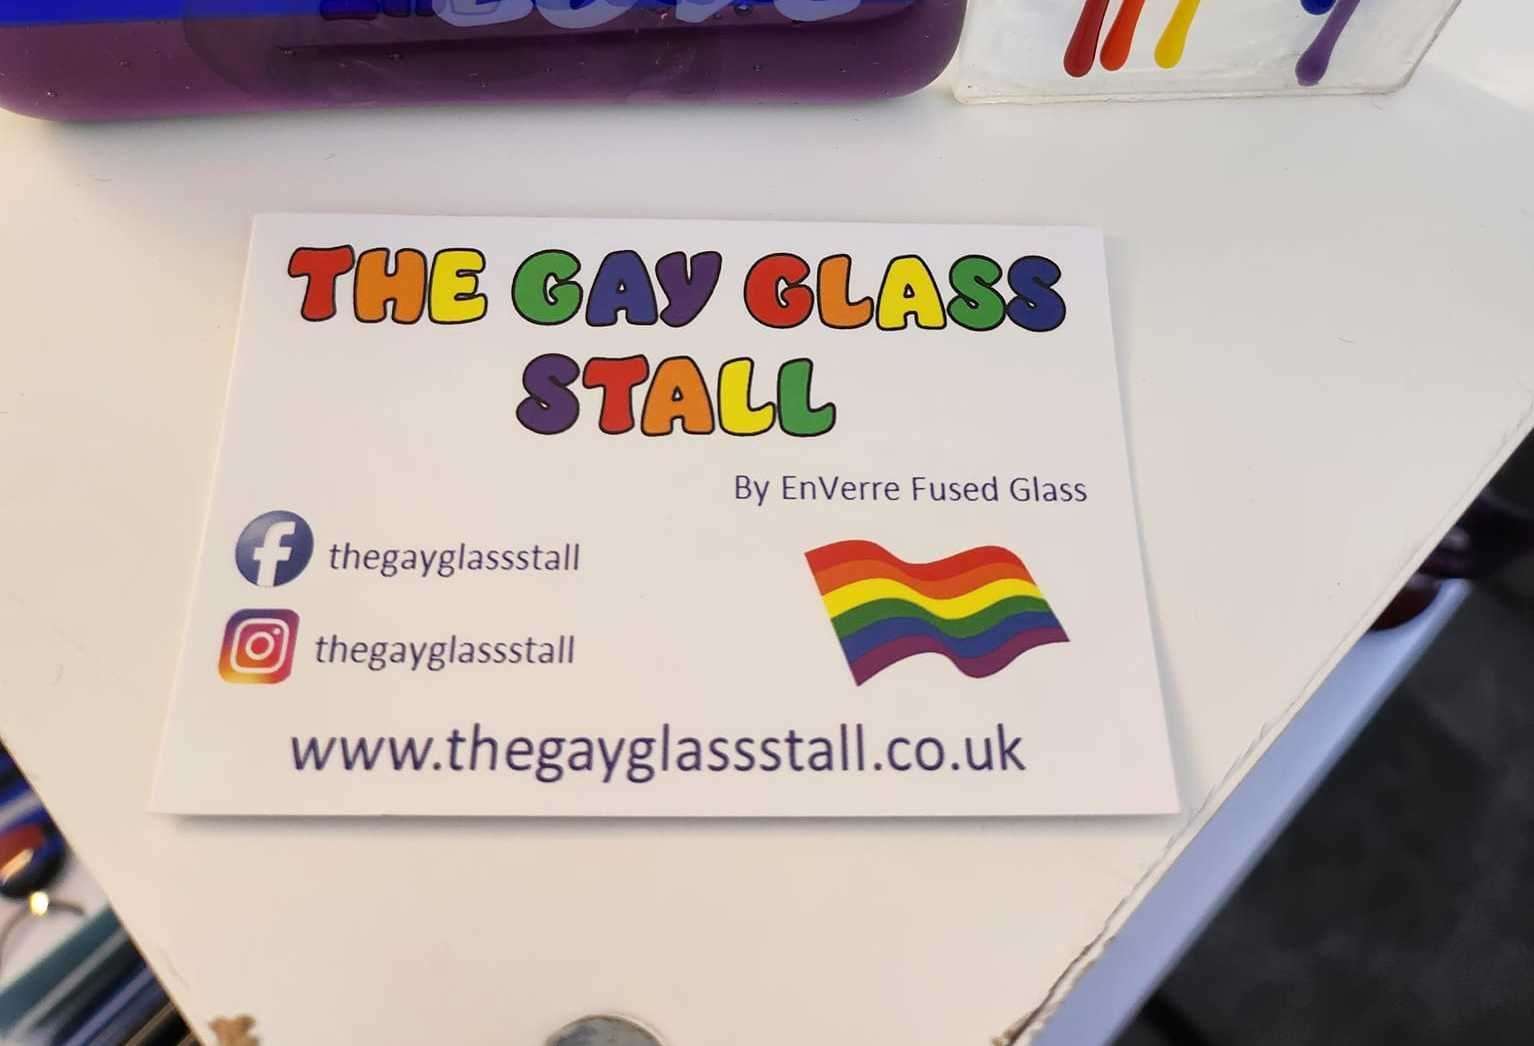 The Gay Glass Stall sells handmade items